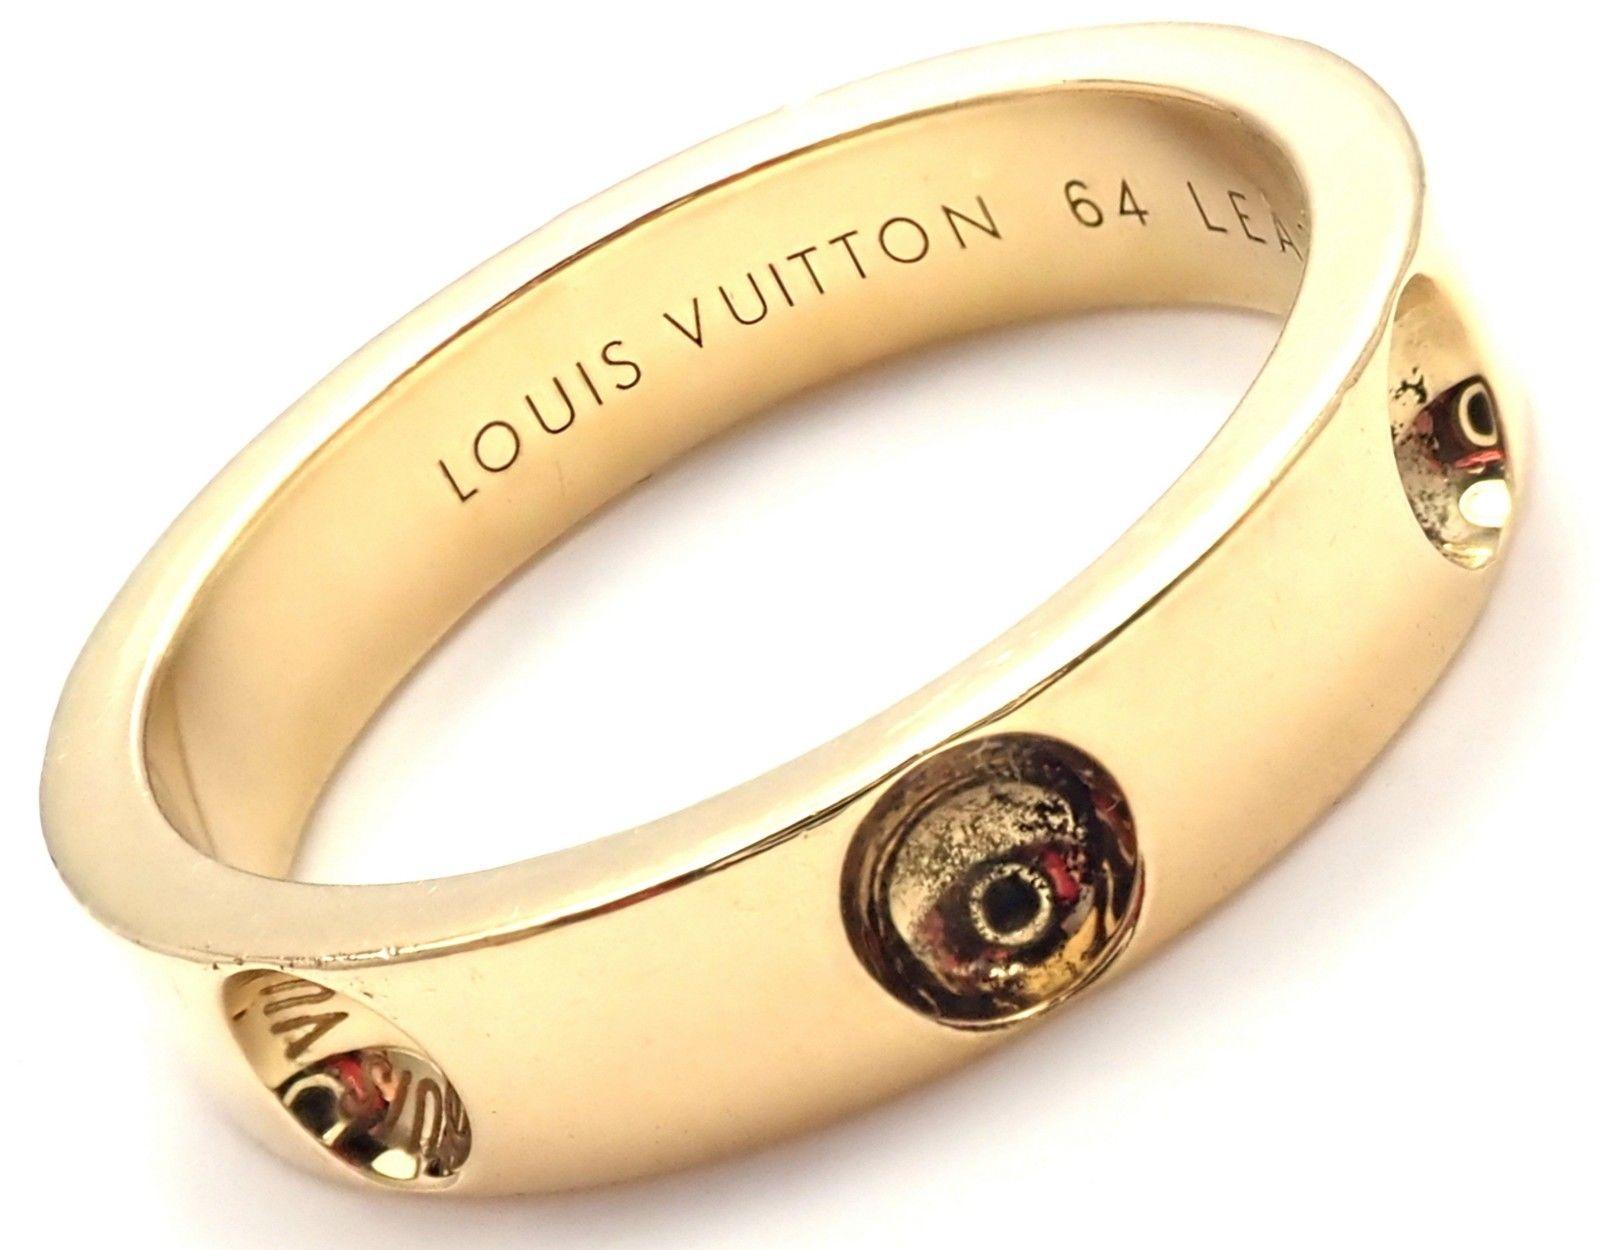 18k Yellow Gold Empreinte Band Ring by Louis Vuitton. 
Details: 
Ring Size: US 0 3/4 - European 64
Width: 5mm
Weight: 8.7 grams
Stamped Hallmarks: Louis Vuitton 750 64 LEA303
*Free Shipping within the United States*
YOUR PRICE: $1,550
8110lad